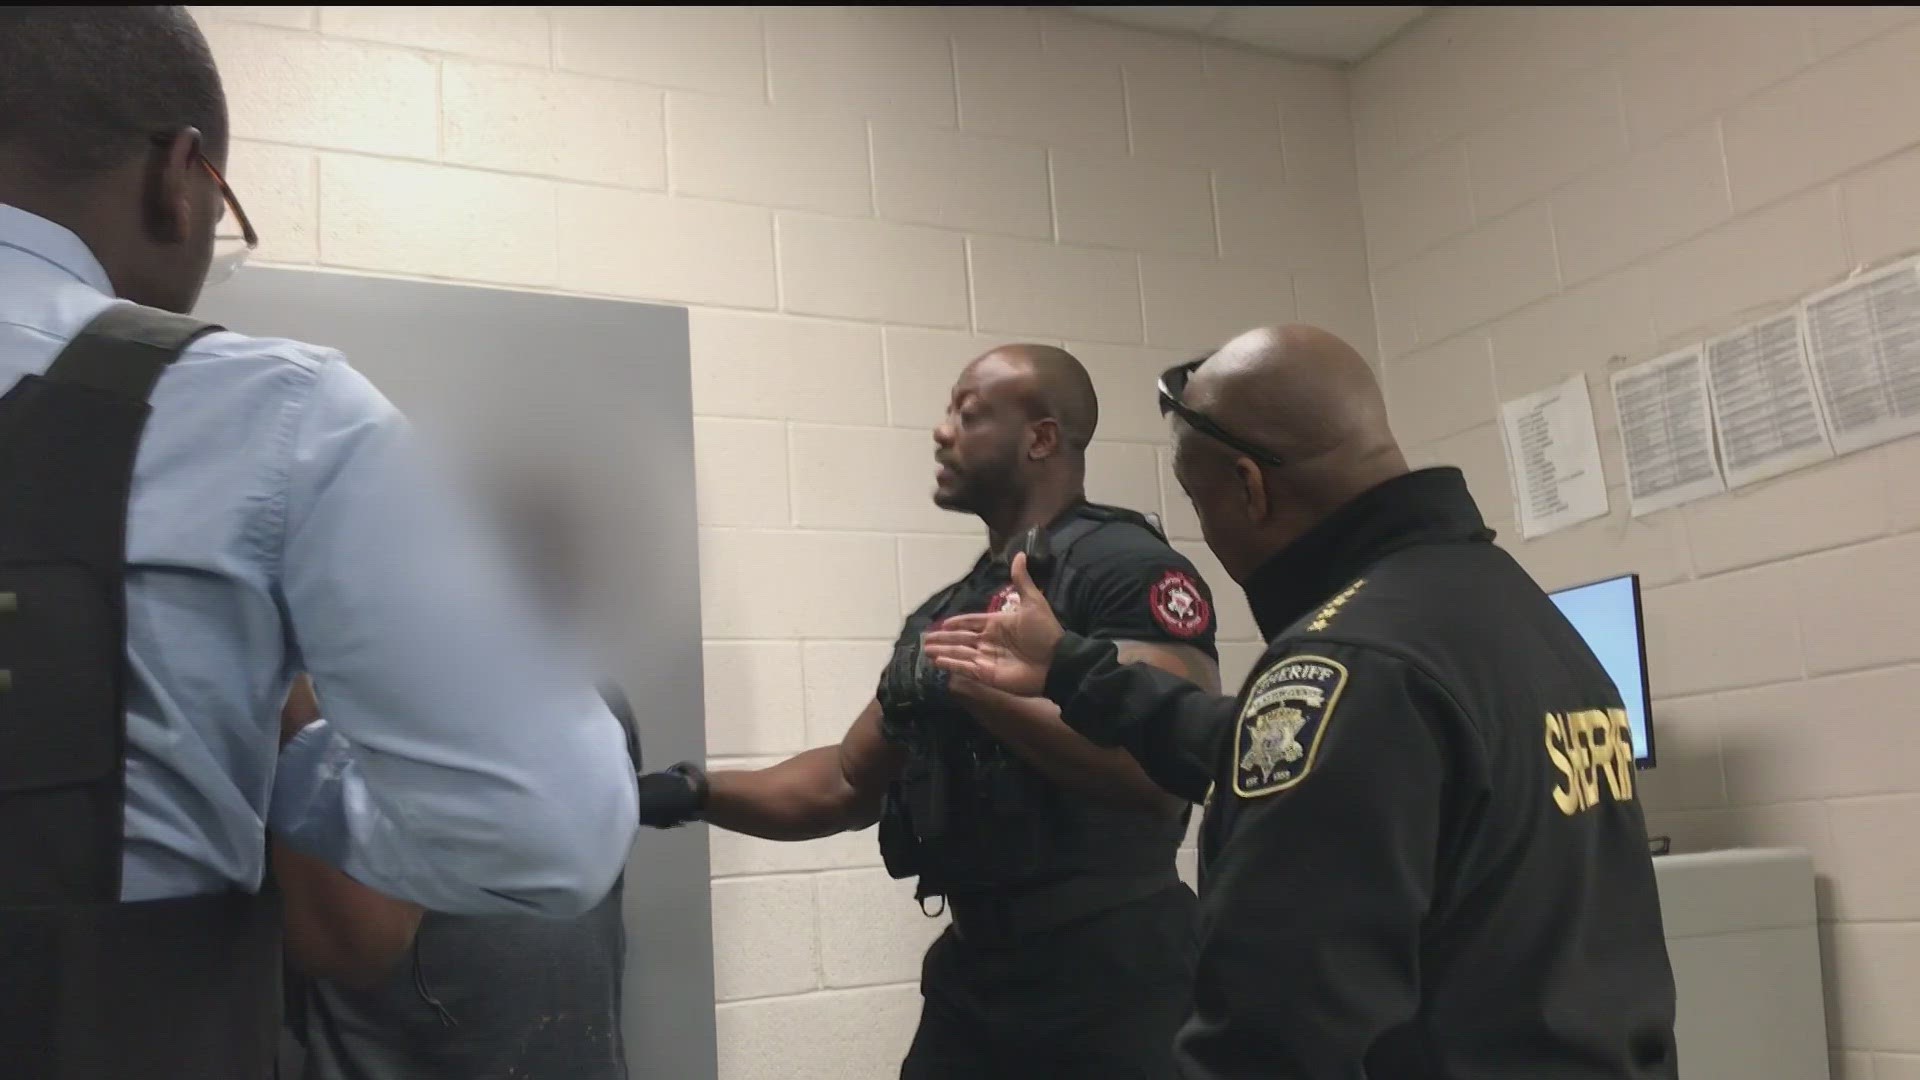 In the video, Hill is seen walking into a holding cell to speak with the man who was just arrested, asking what he was doing in Clayton County.